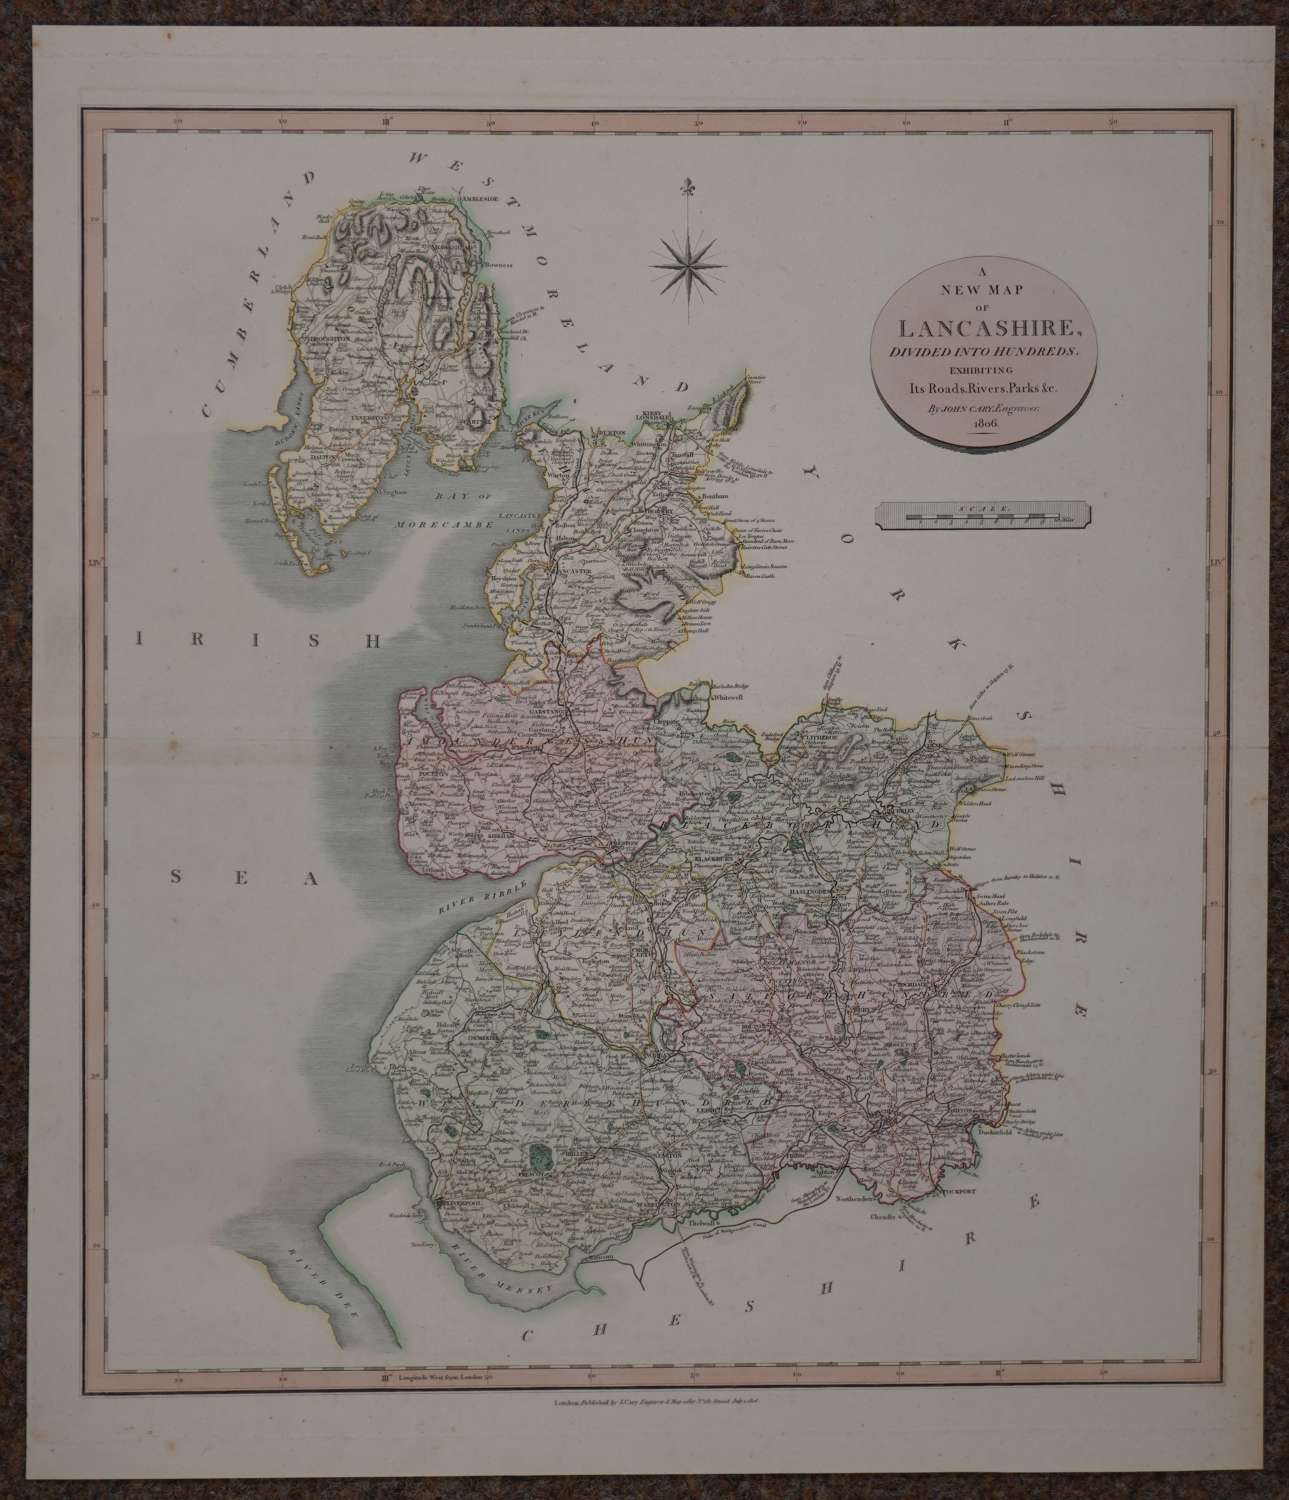 A New Map of Lancashire by John Cary